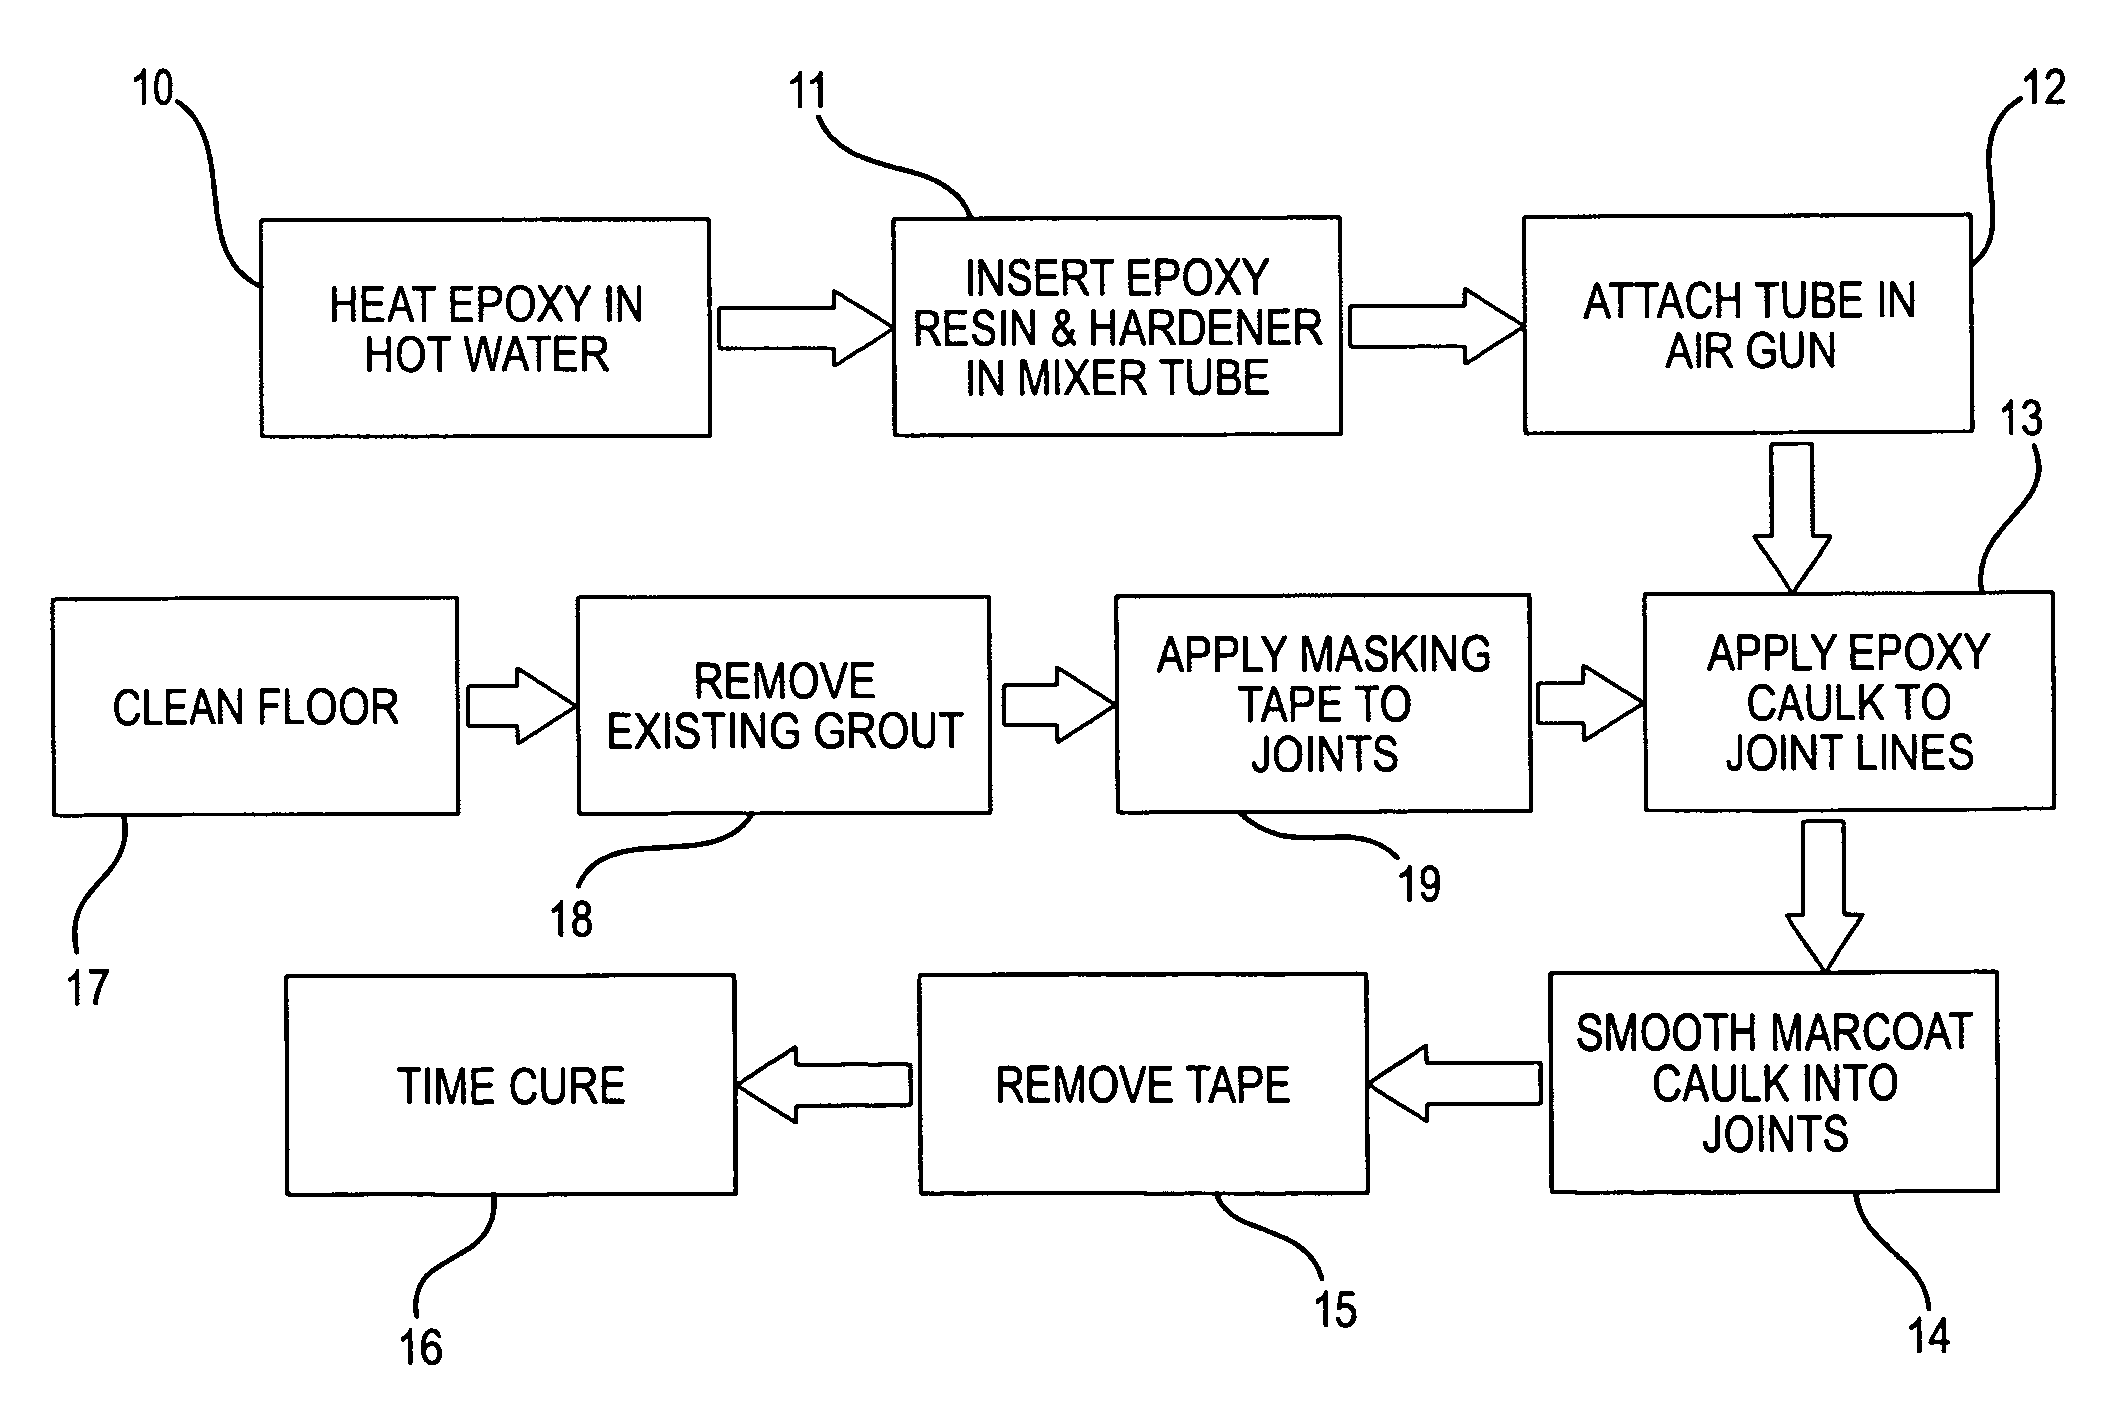 Method of grouting commercial kitchen floors using a two-part reactive epoxy grout